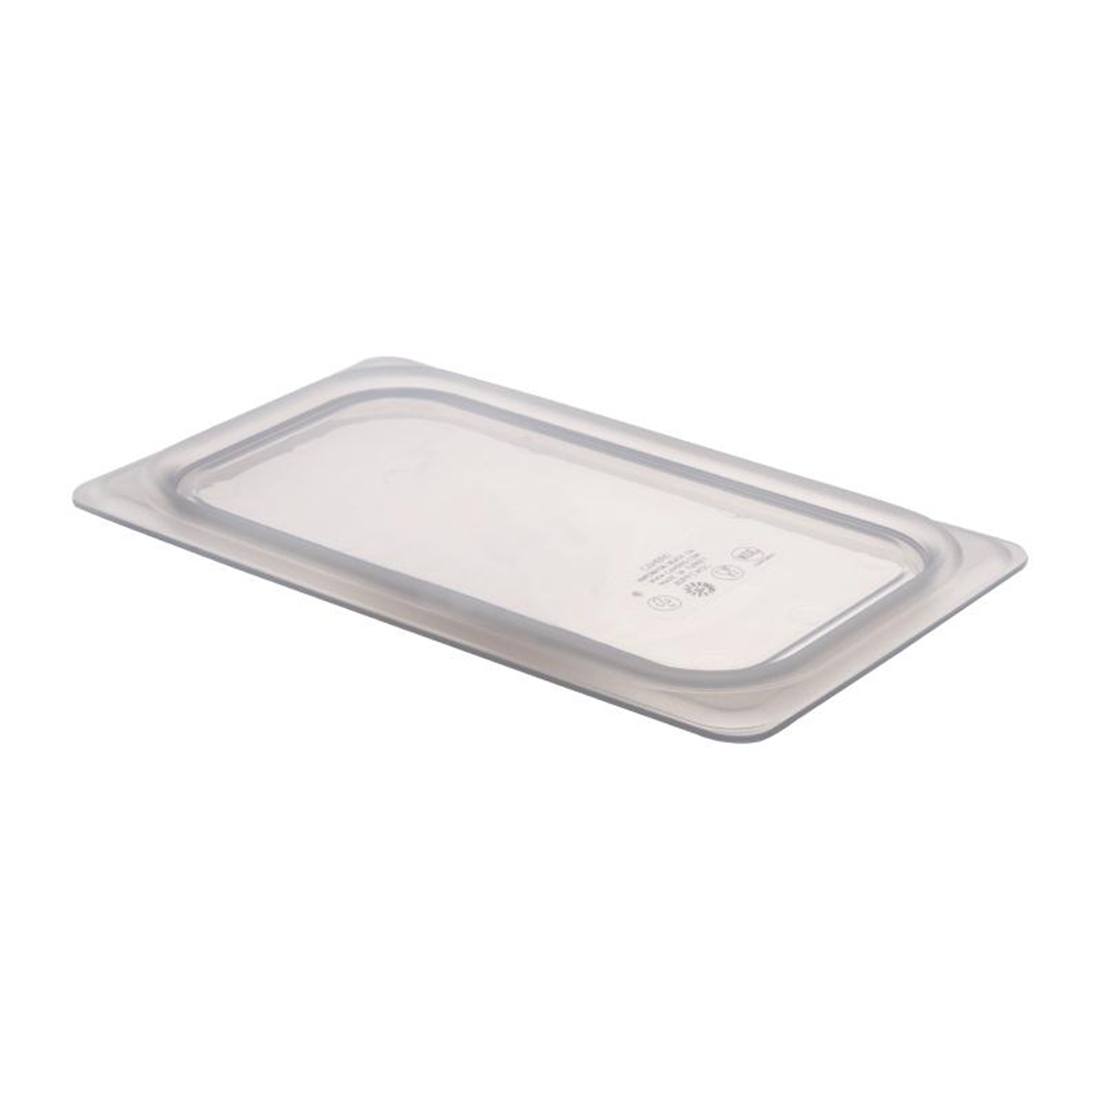 Cambro Gastronorm Pan 1/4 Soft Seal Lid